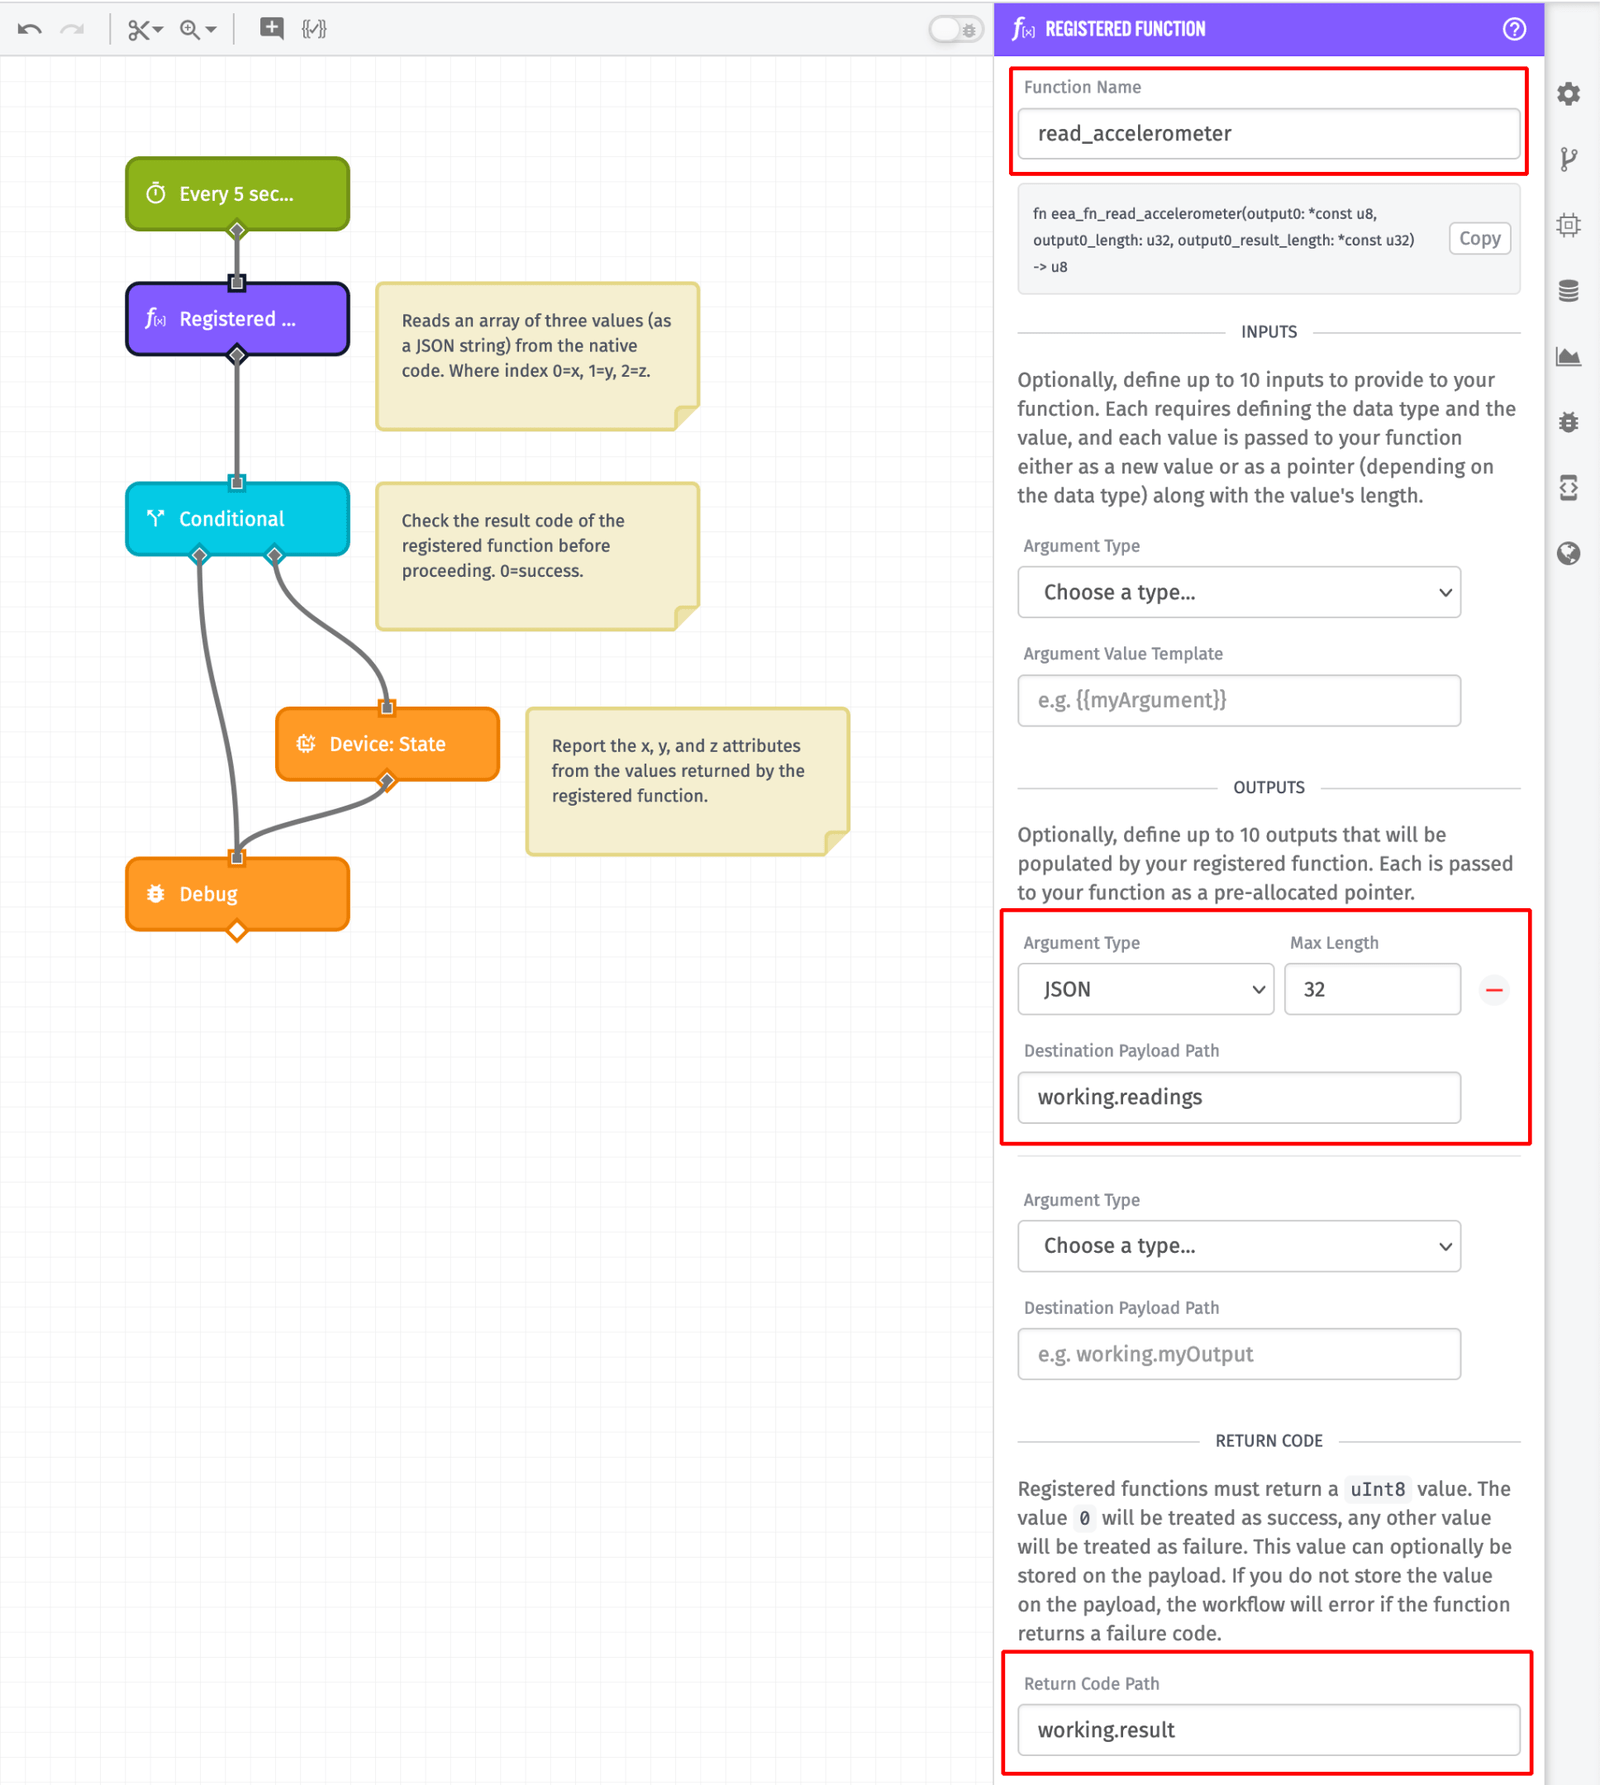 EEA API Bundle workflow with Registered Function configuration highlighted